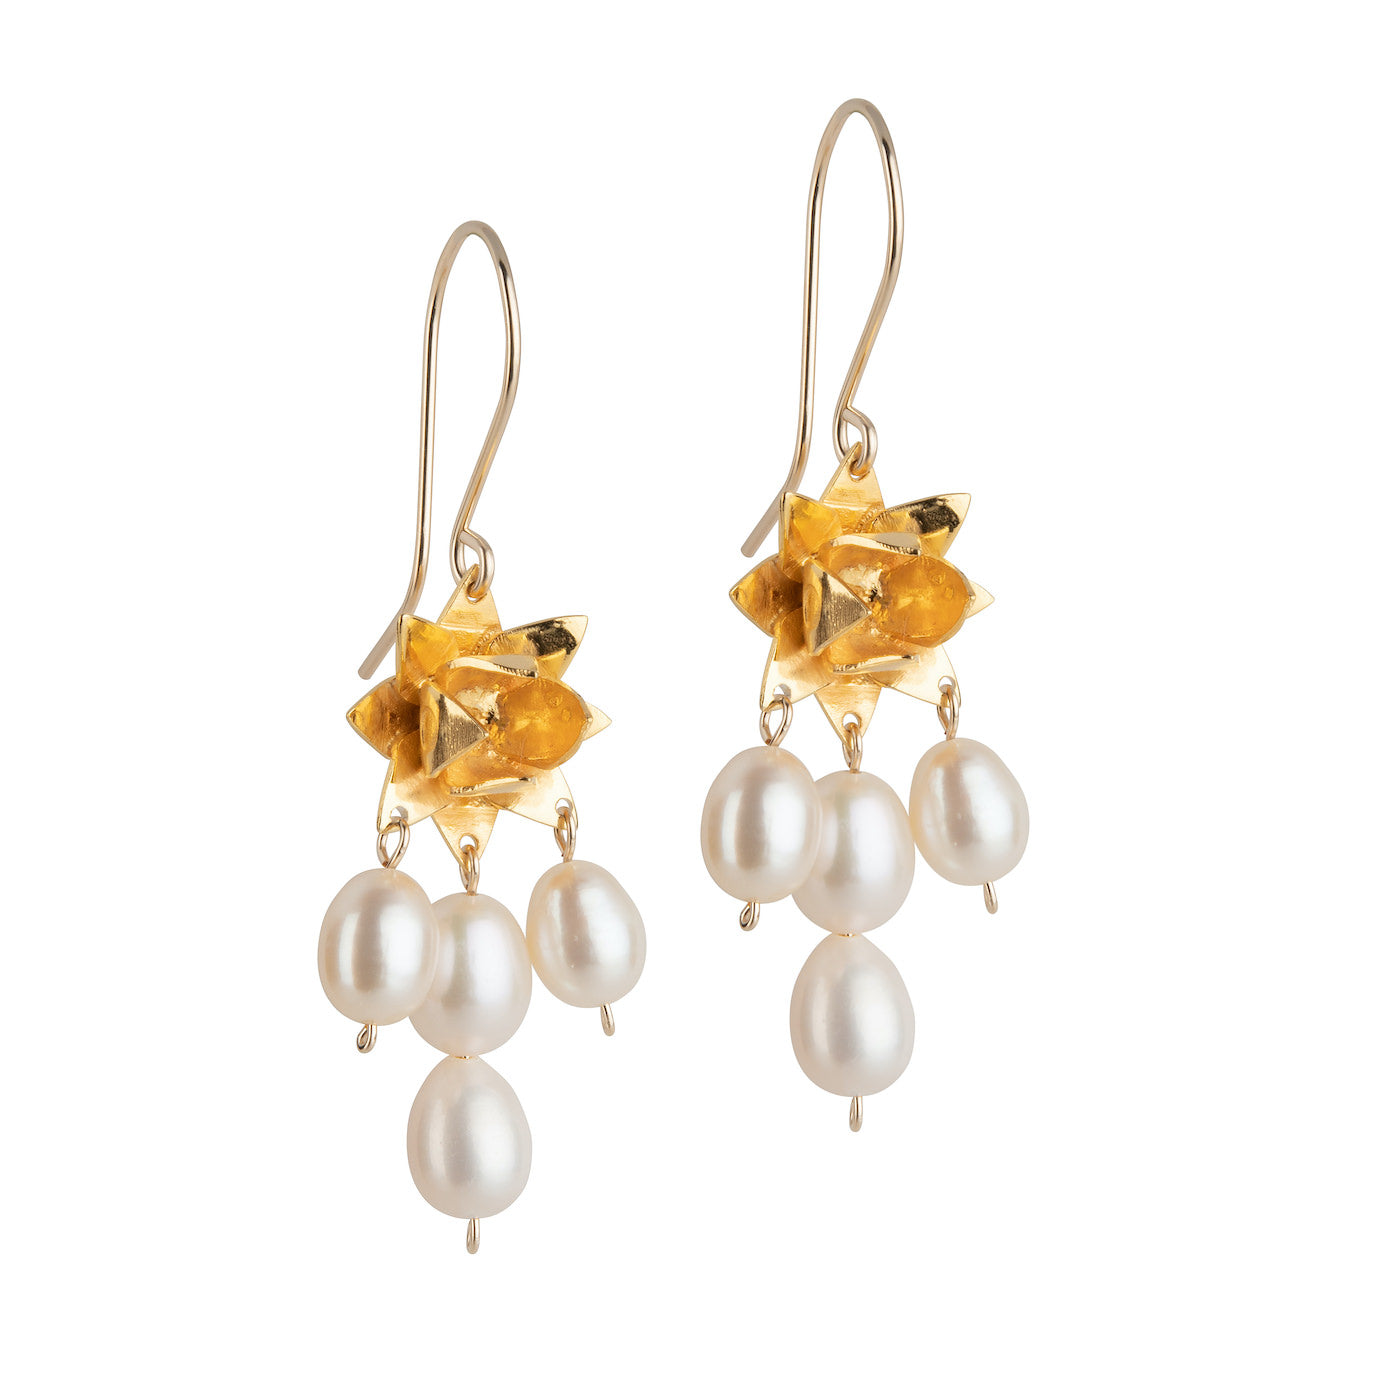 Front view of Lotus Dawn Pearl Earrings in gold vermeil on white background